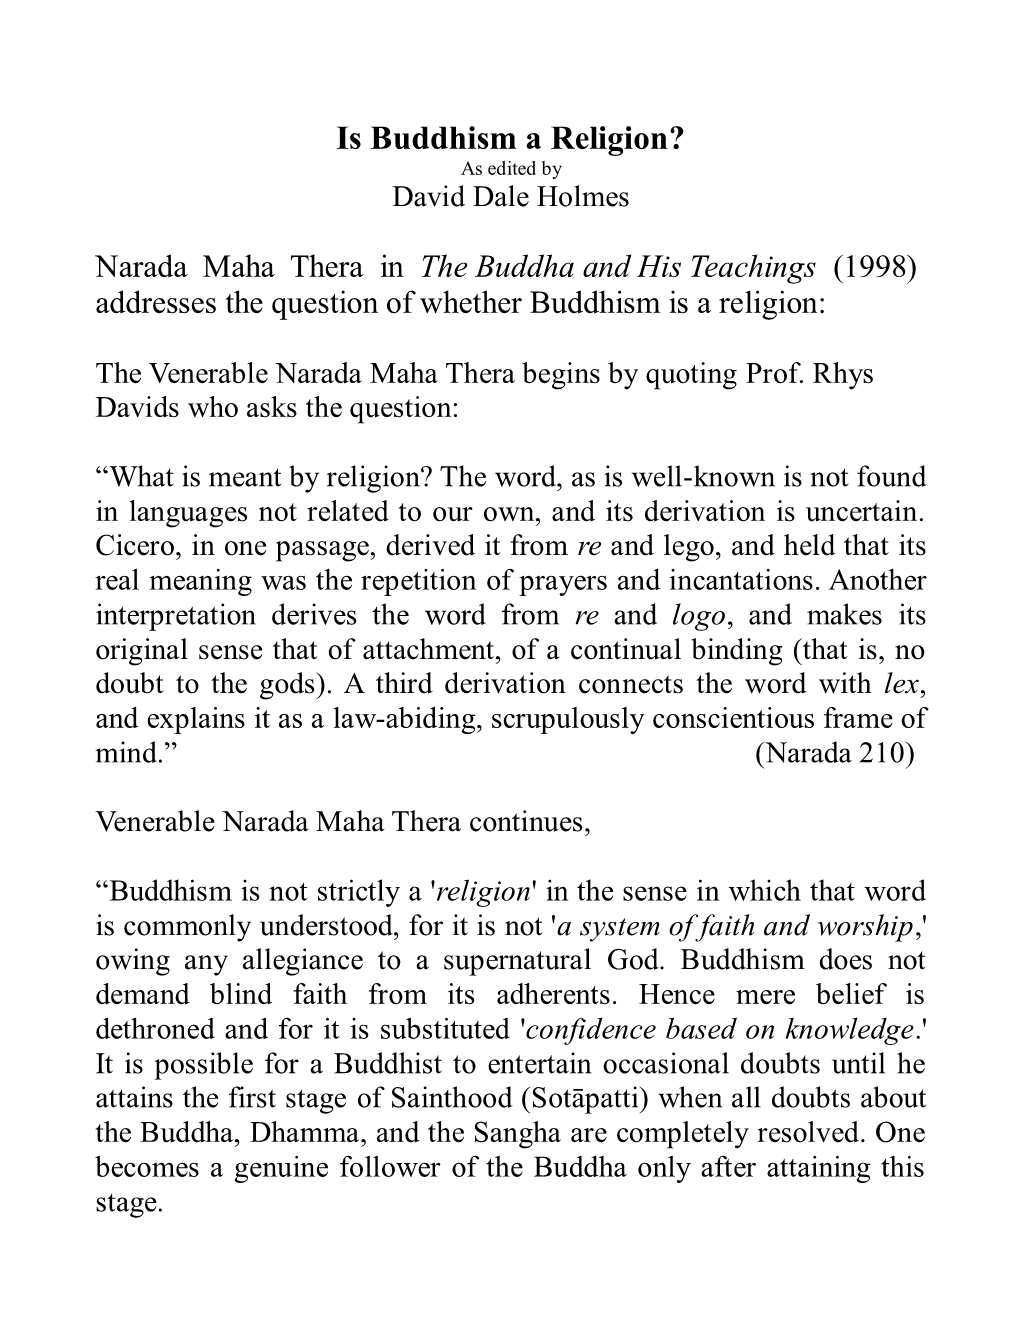 Is Buddhism a Religion? As Edited by David Dale Holmes